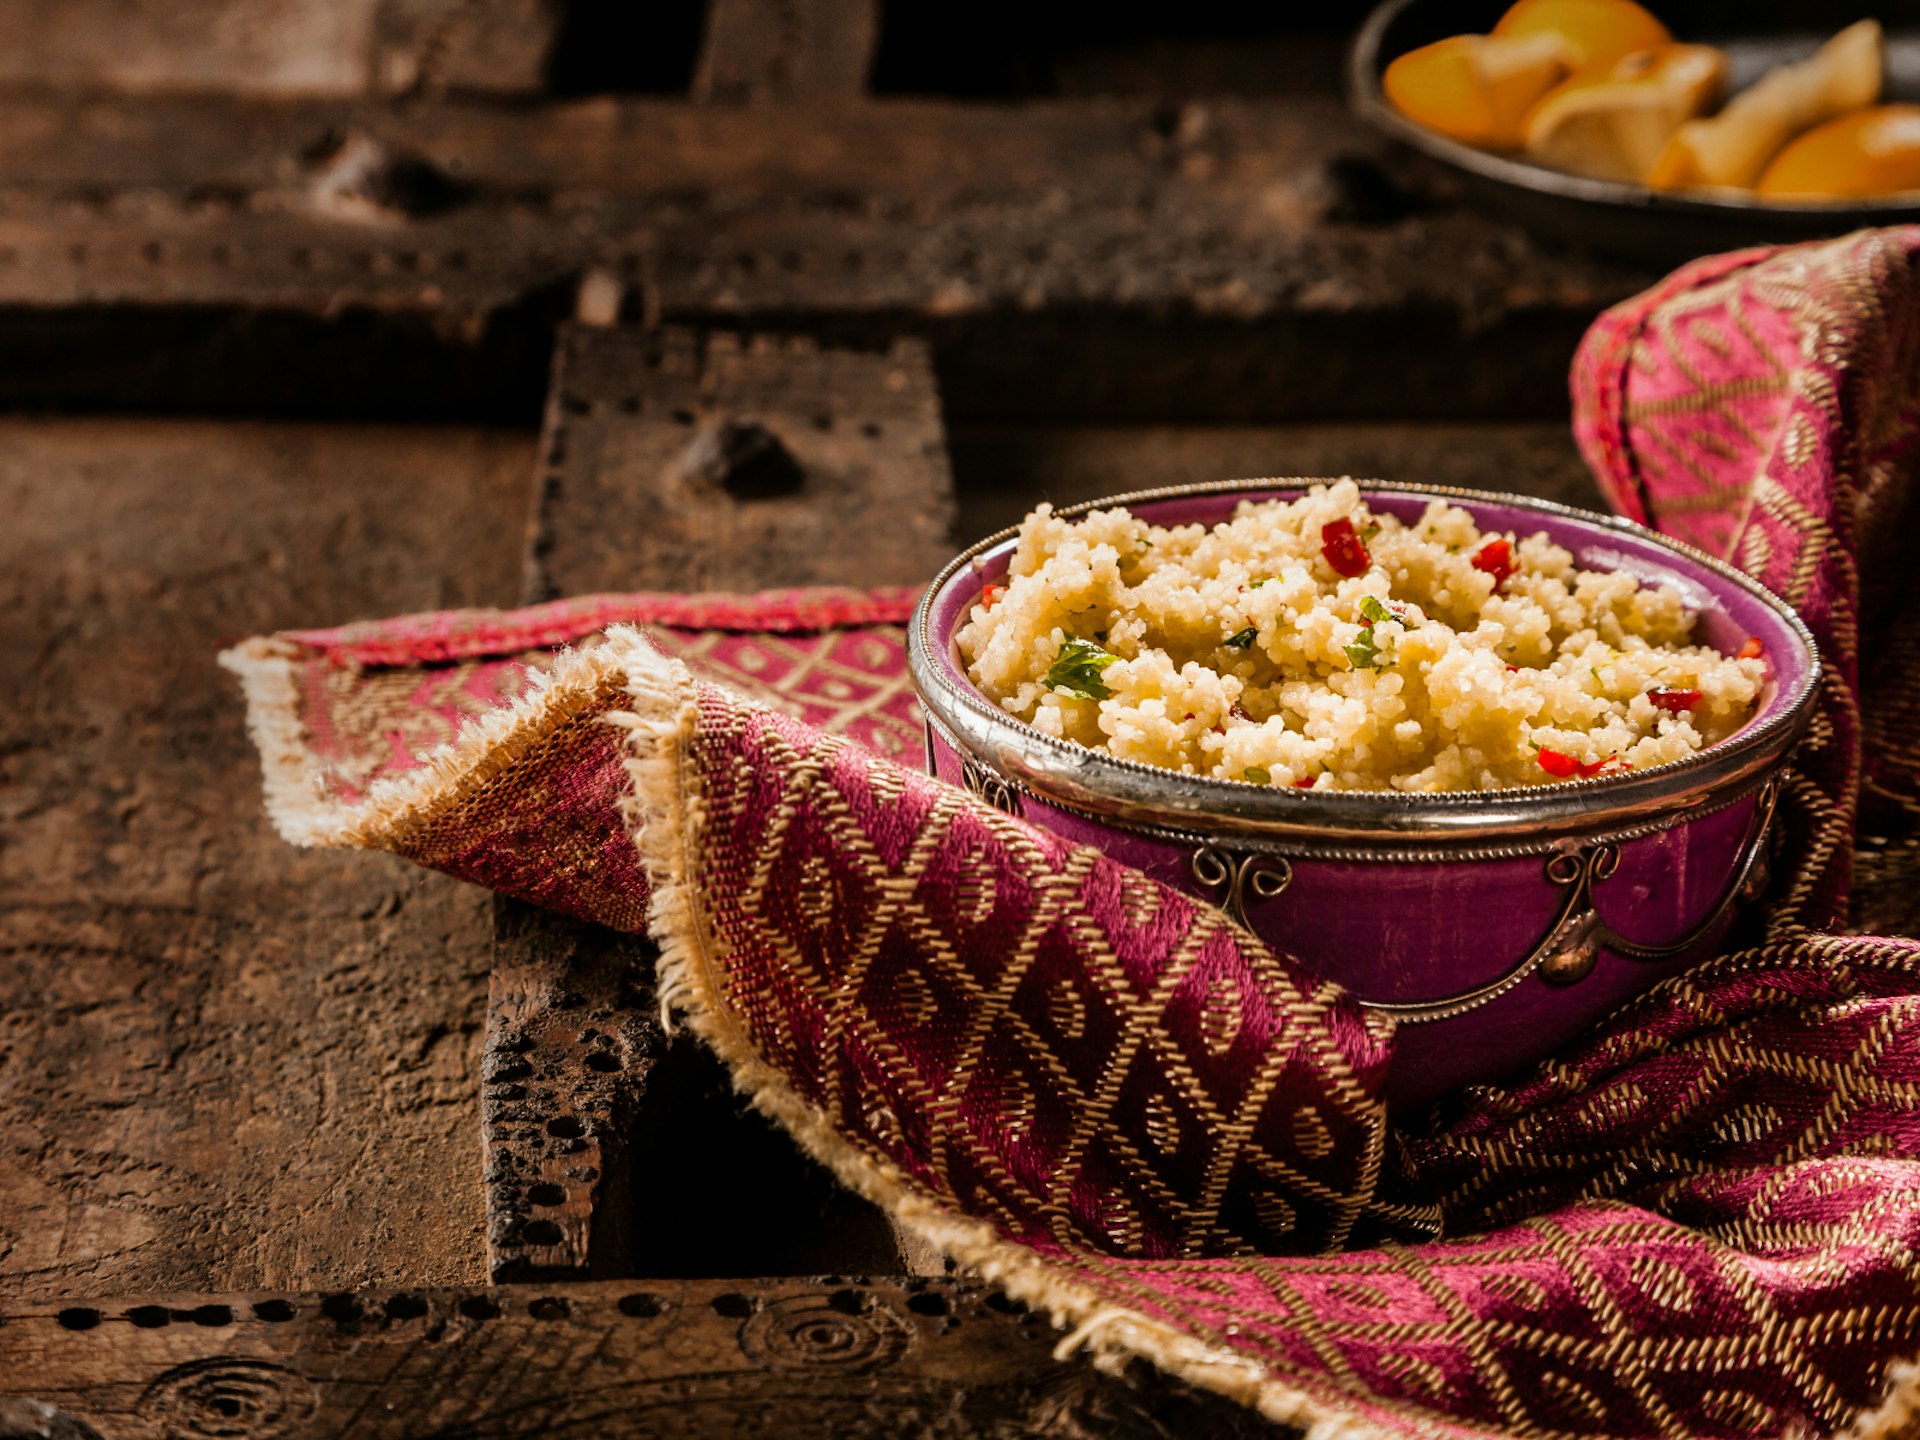 Moroccan couscous in an ornate bowl © stockcreations / Shutterstock